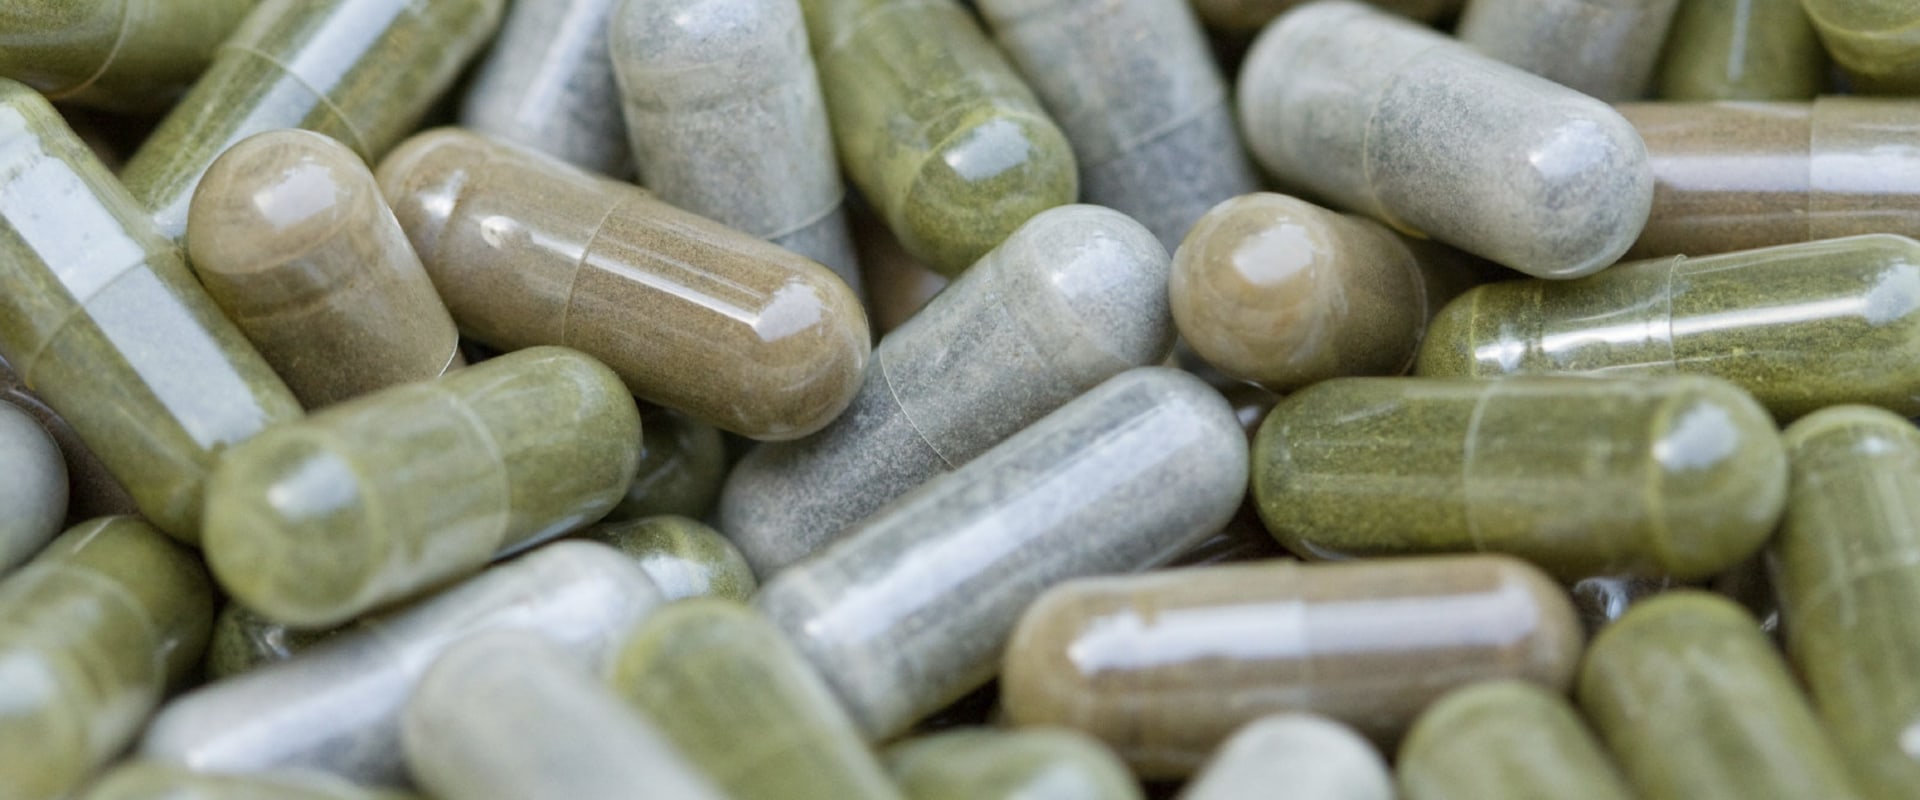 Are There Risks of Taking Too Much Health Supplements? - An Expert's Perspective